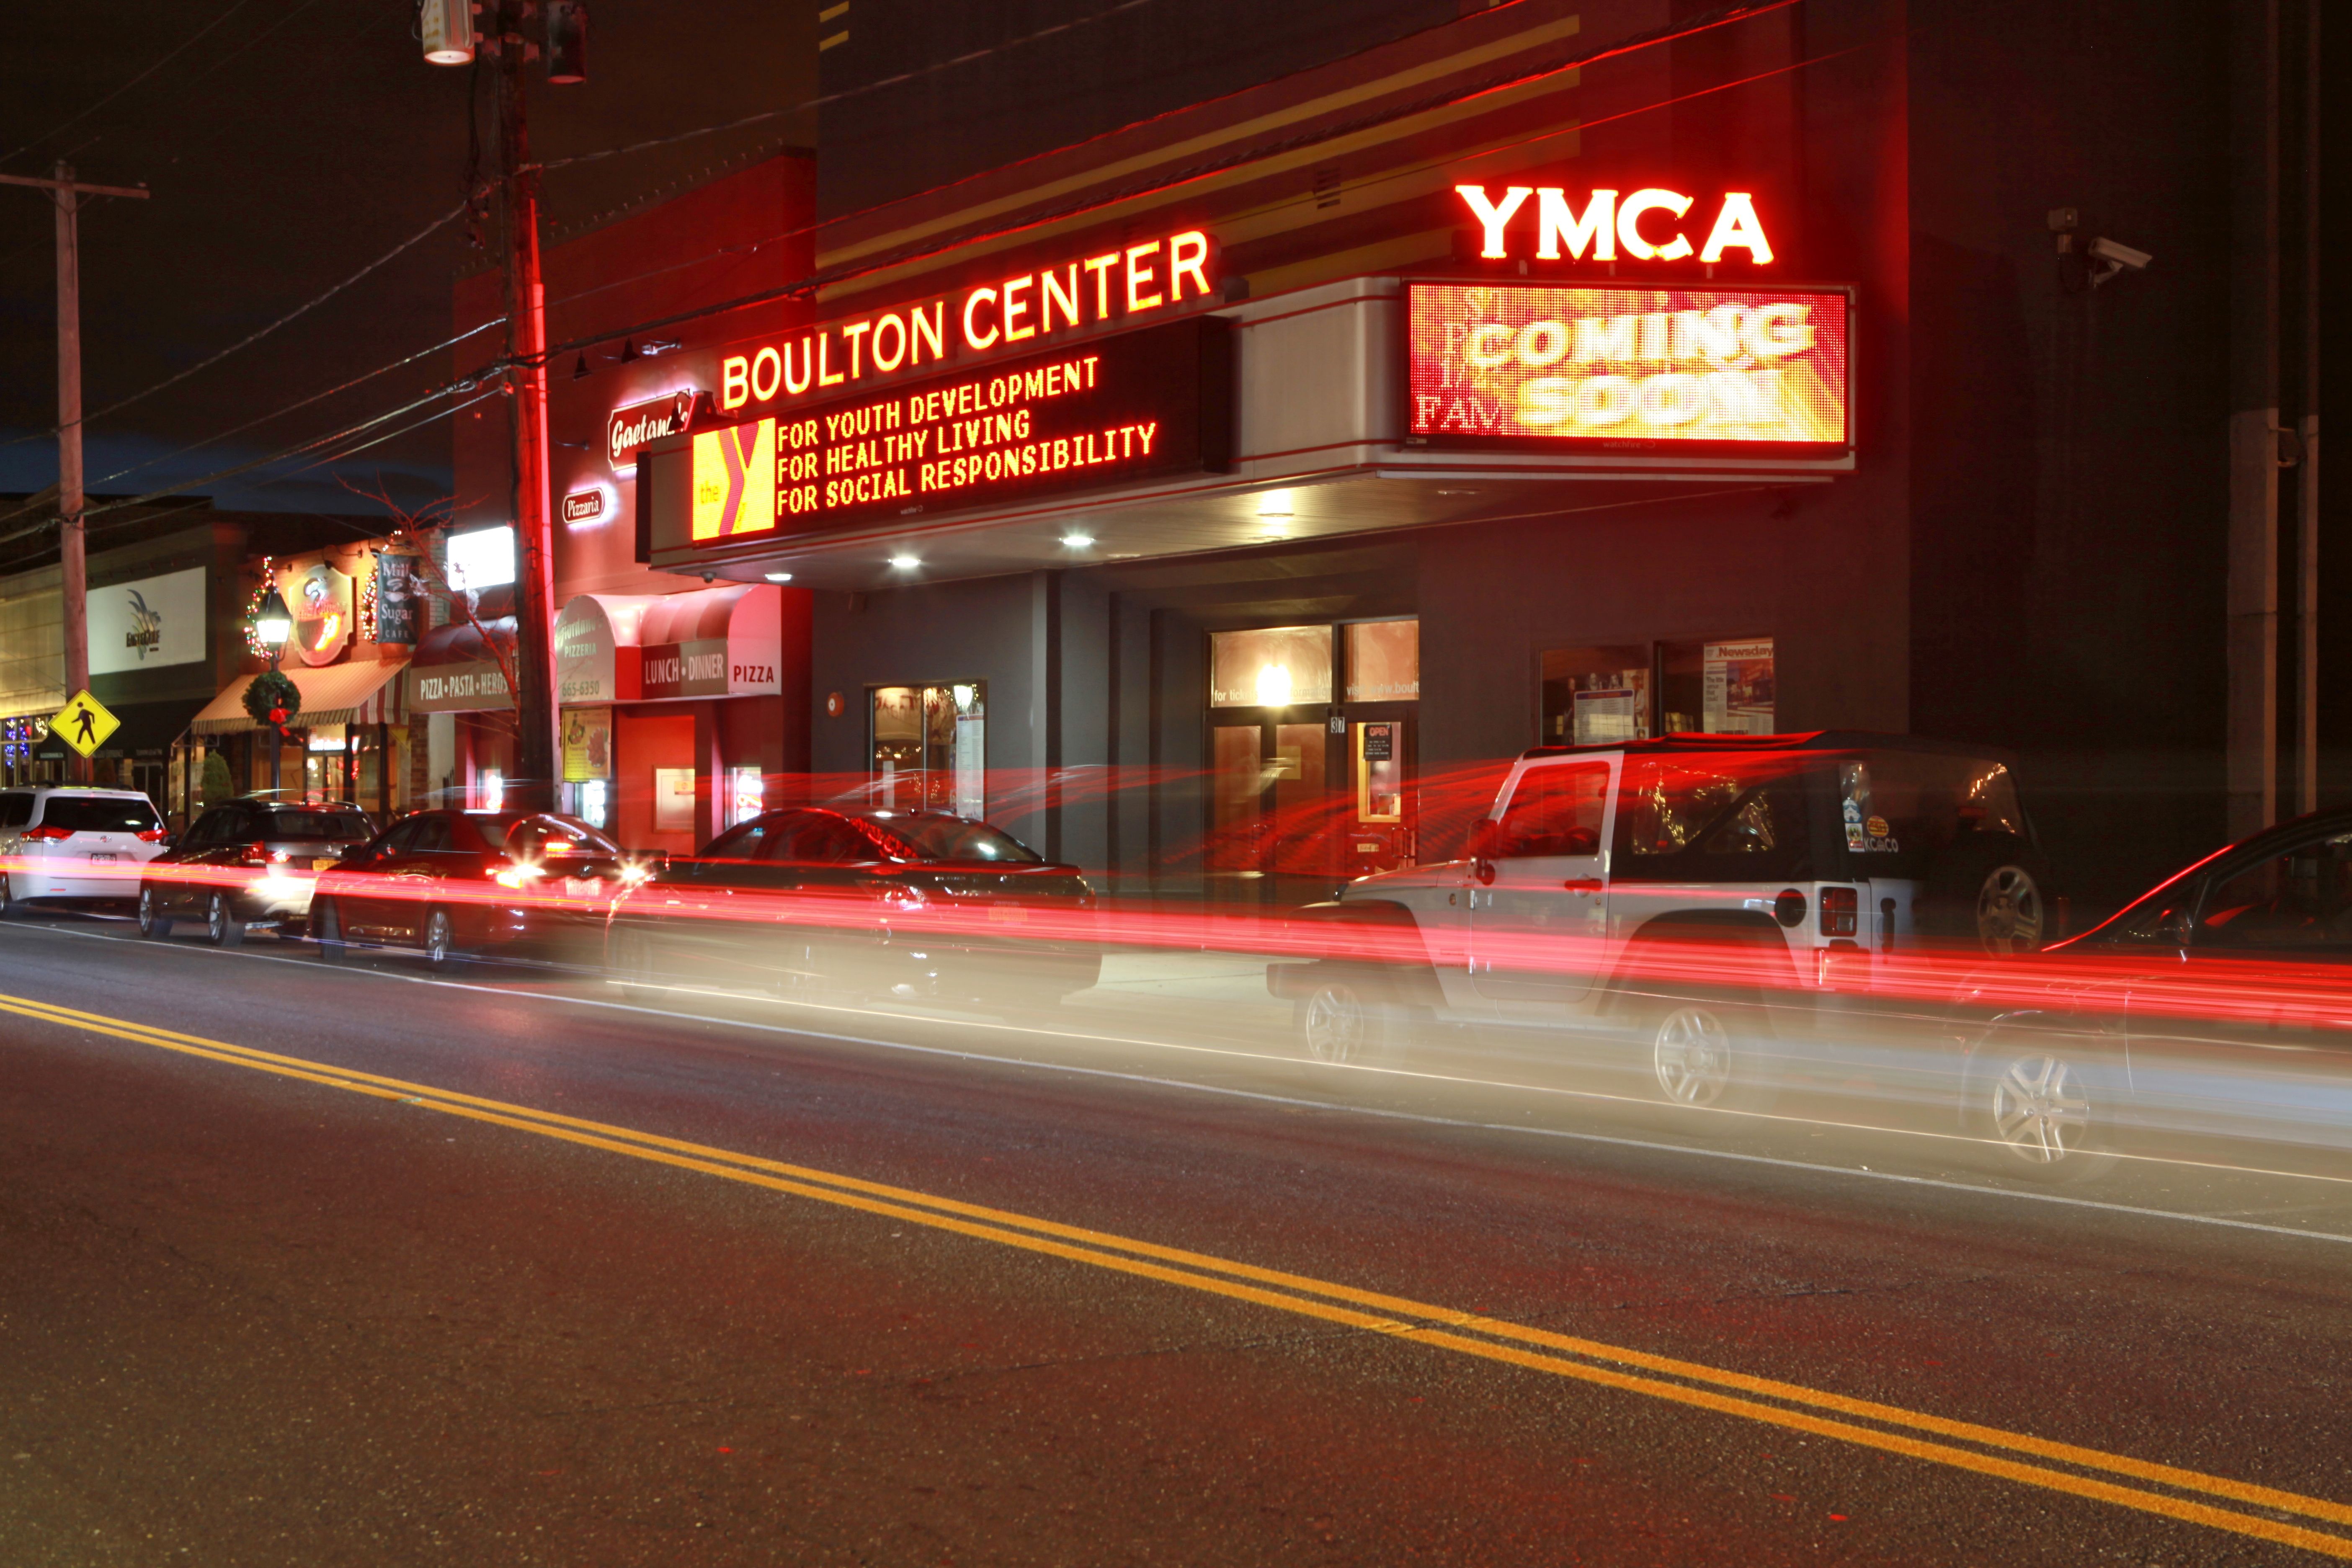 YMCA Boulton Center for the Performing Arts